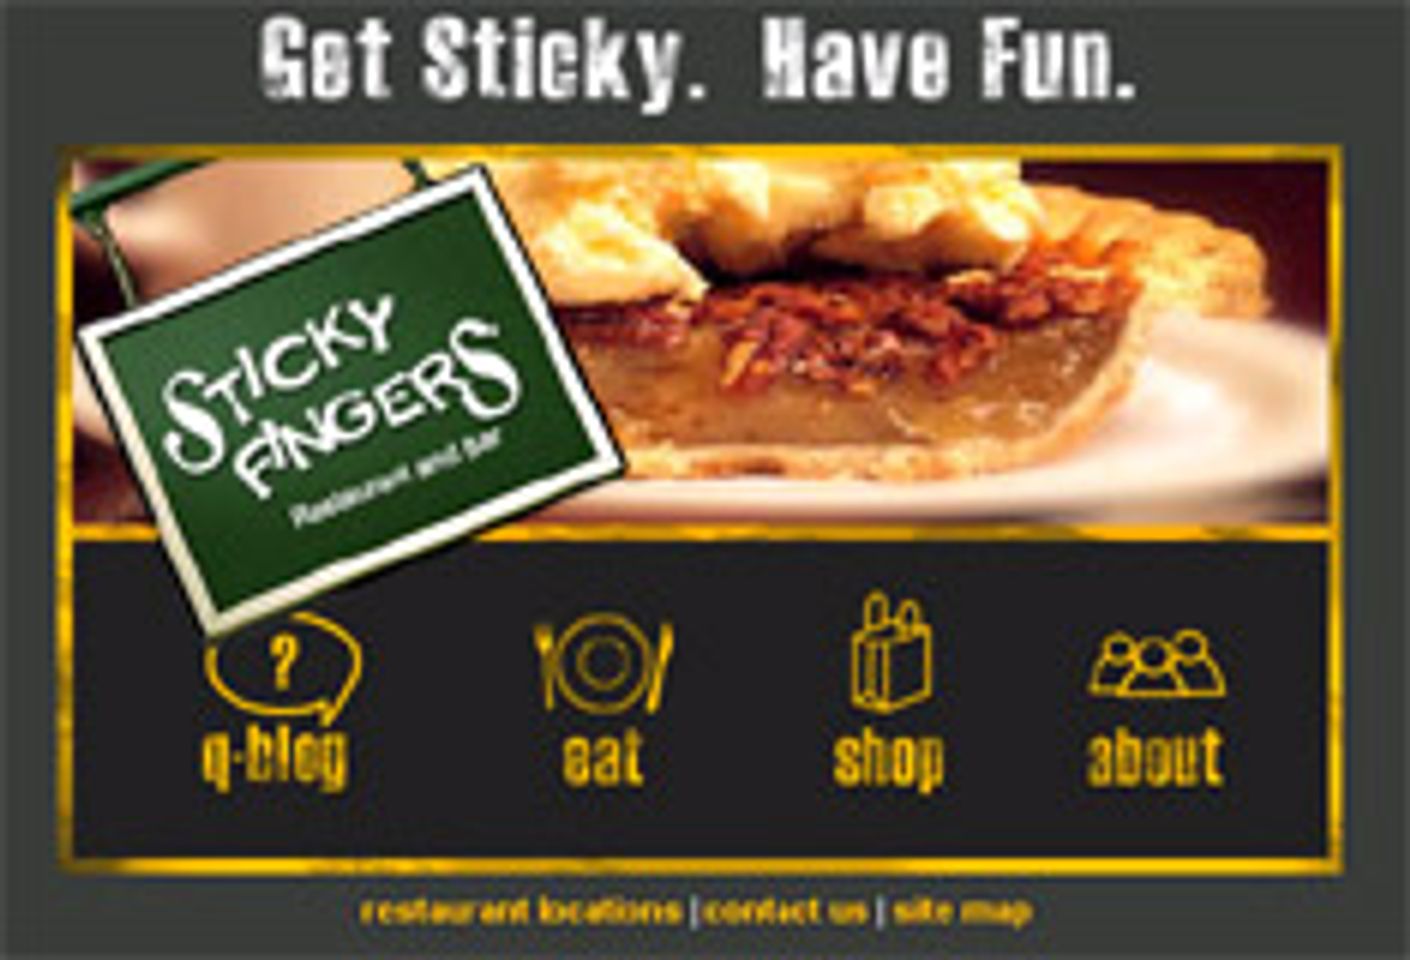 Sticky Fingers BBQ Buys Sticky Fingers.com Adult Domain